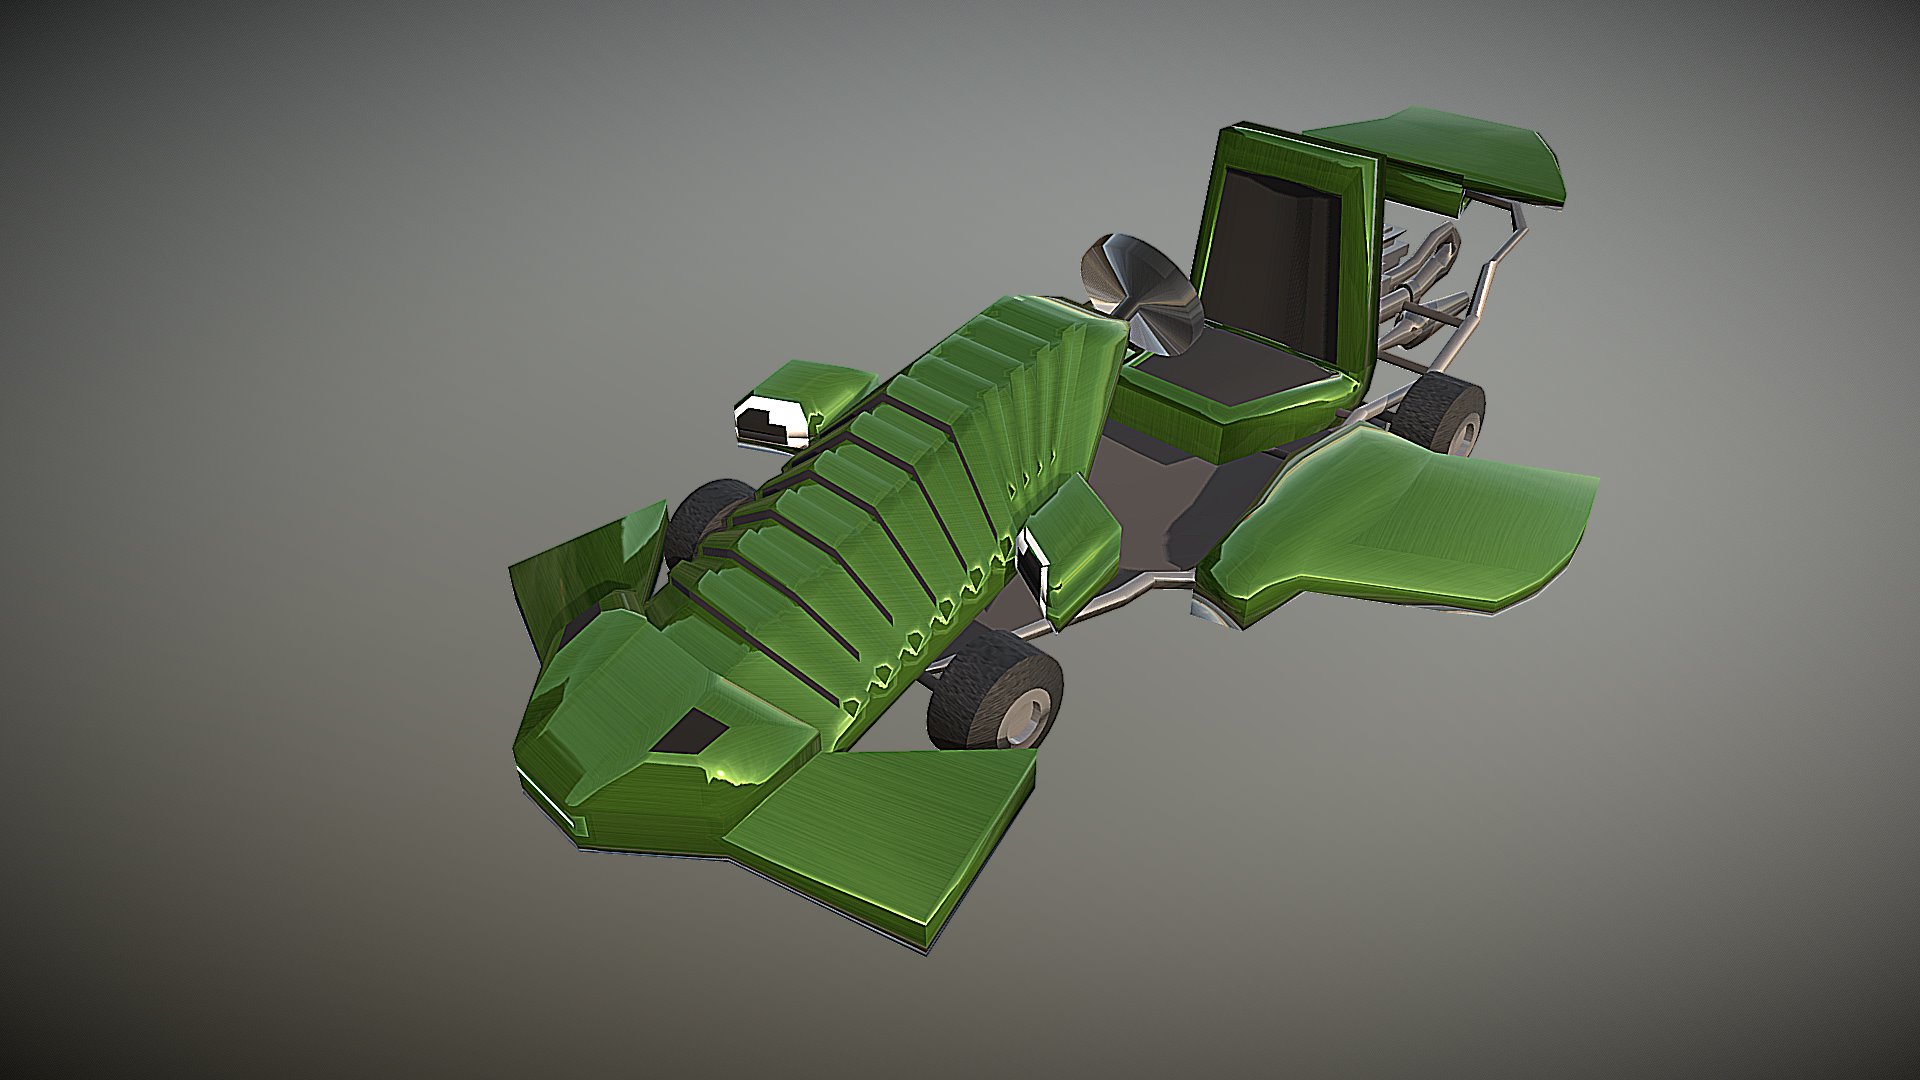 3D model Go Kart3 - This is a 3D model of the Go Kart3. The 3D model is about a green toy car.